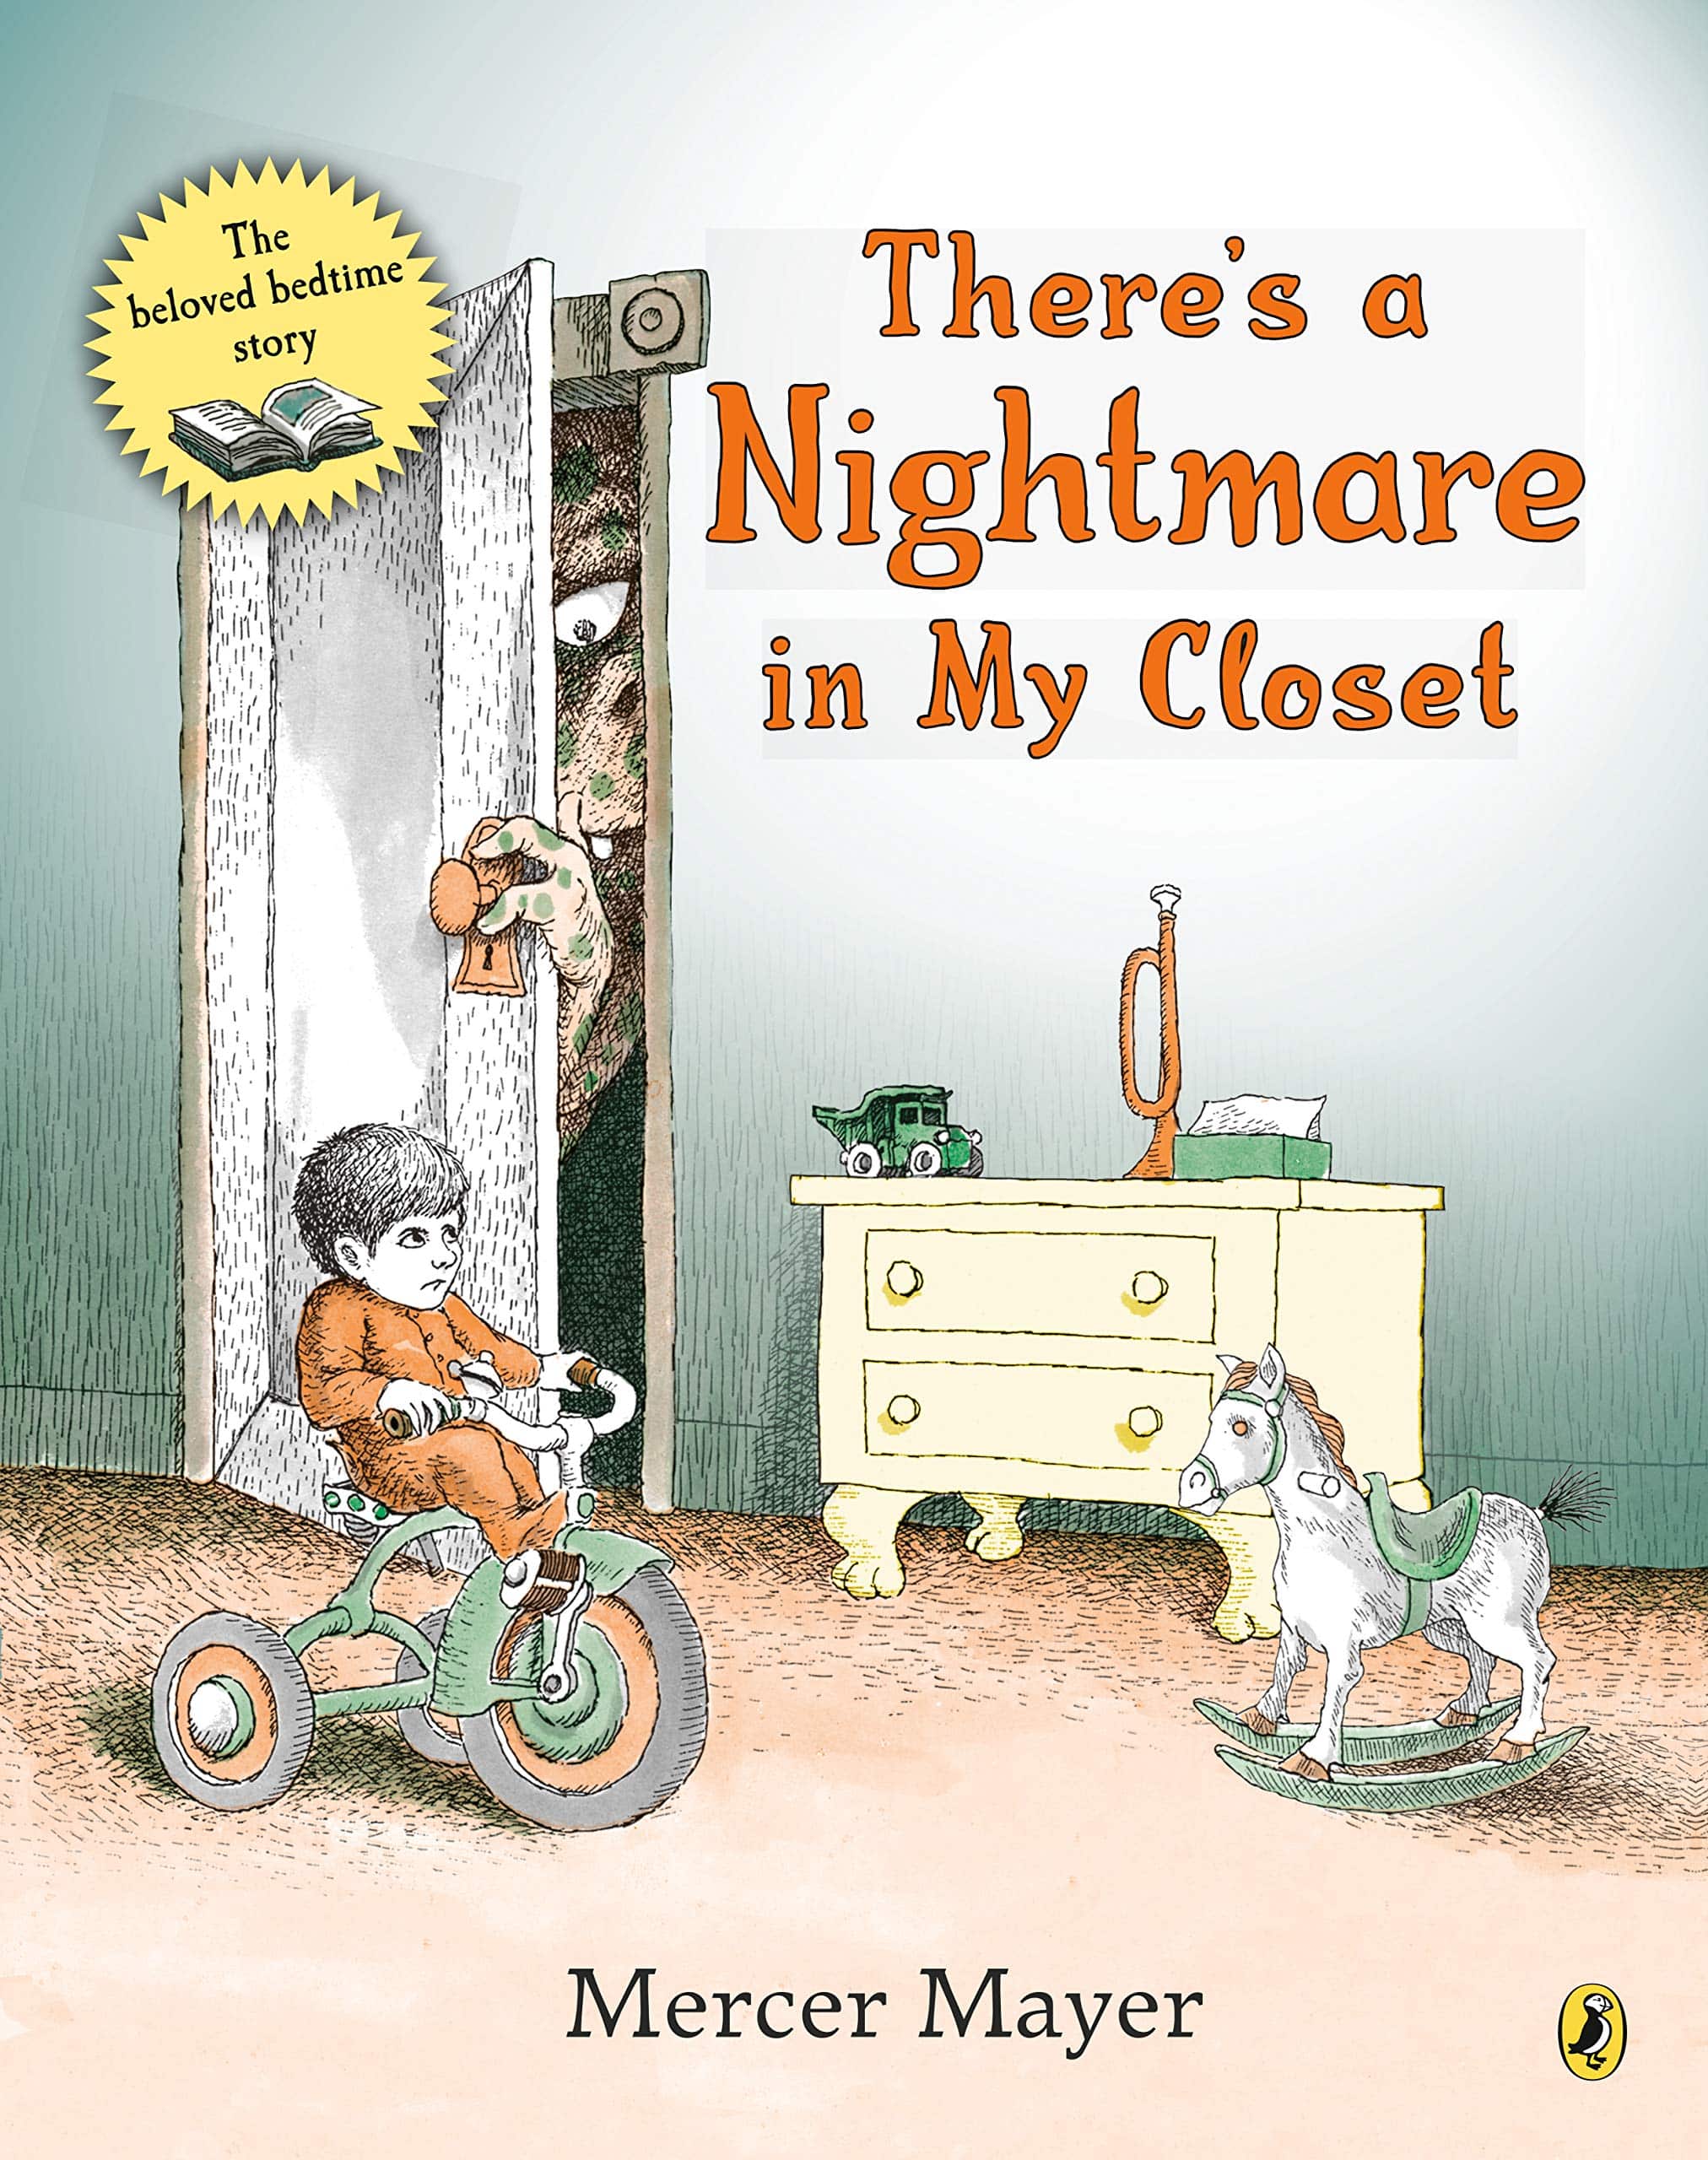 The cover for the book There's a Nightmare in My Closet